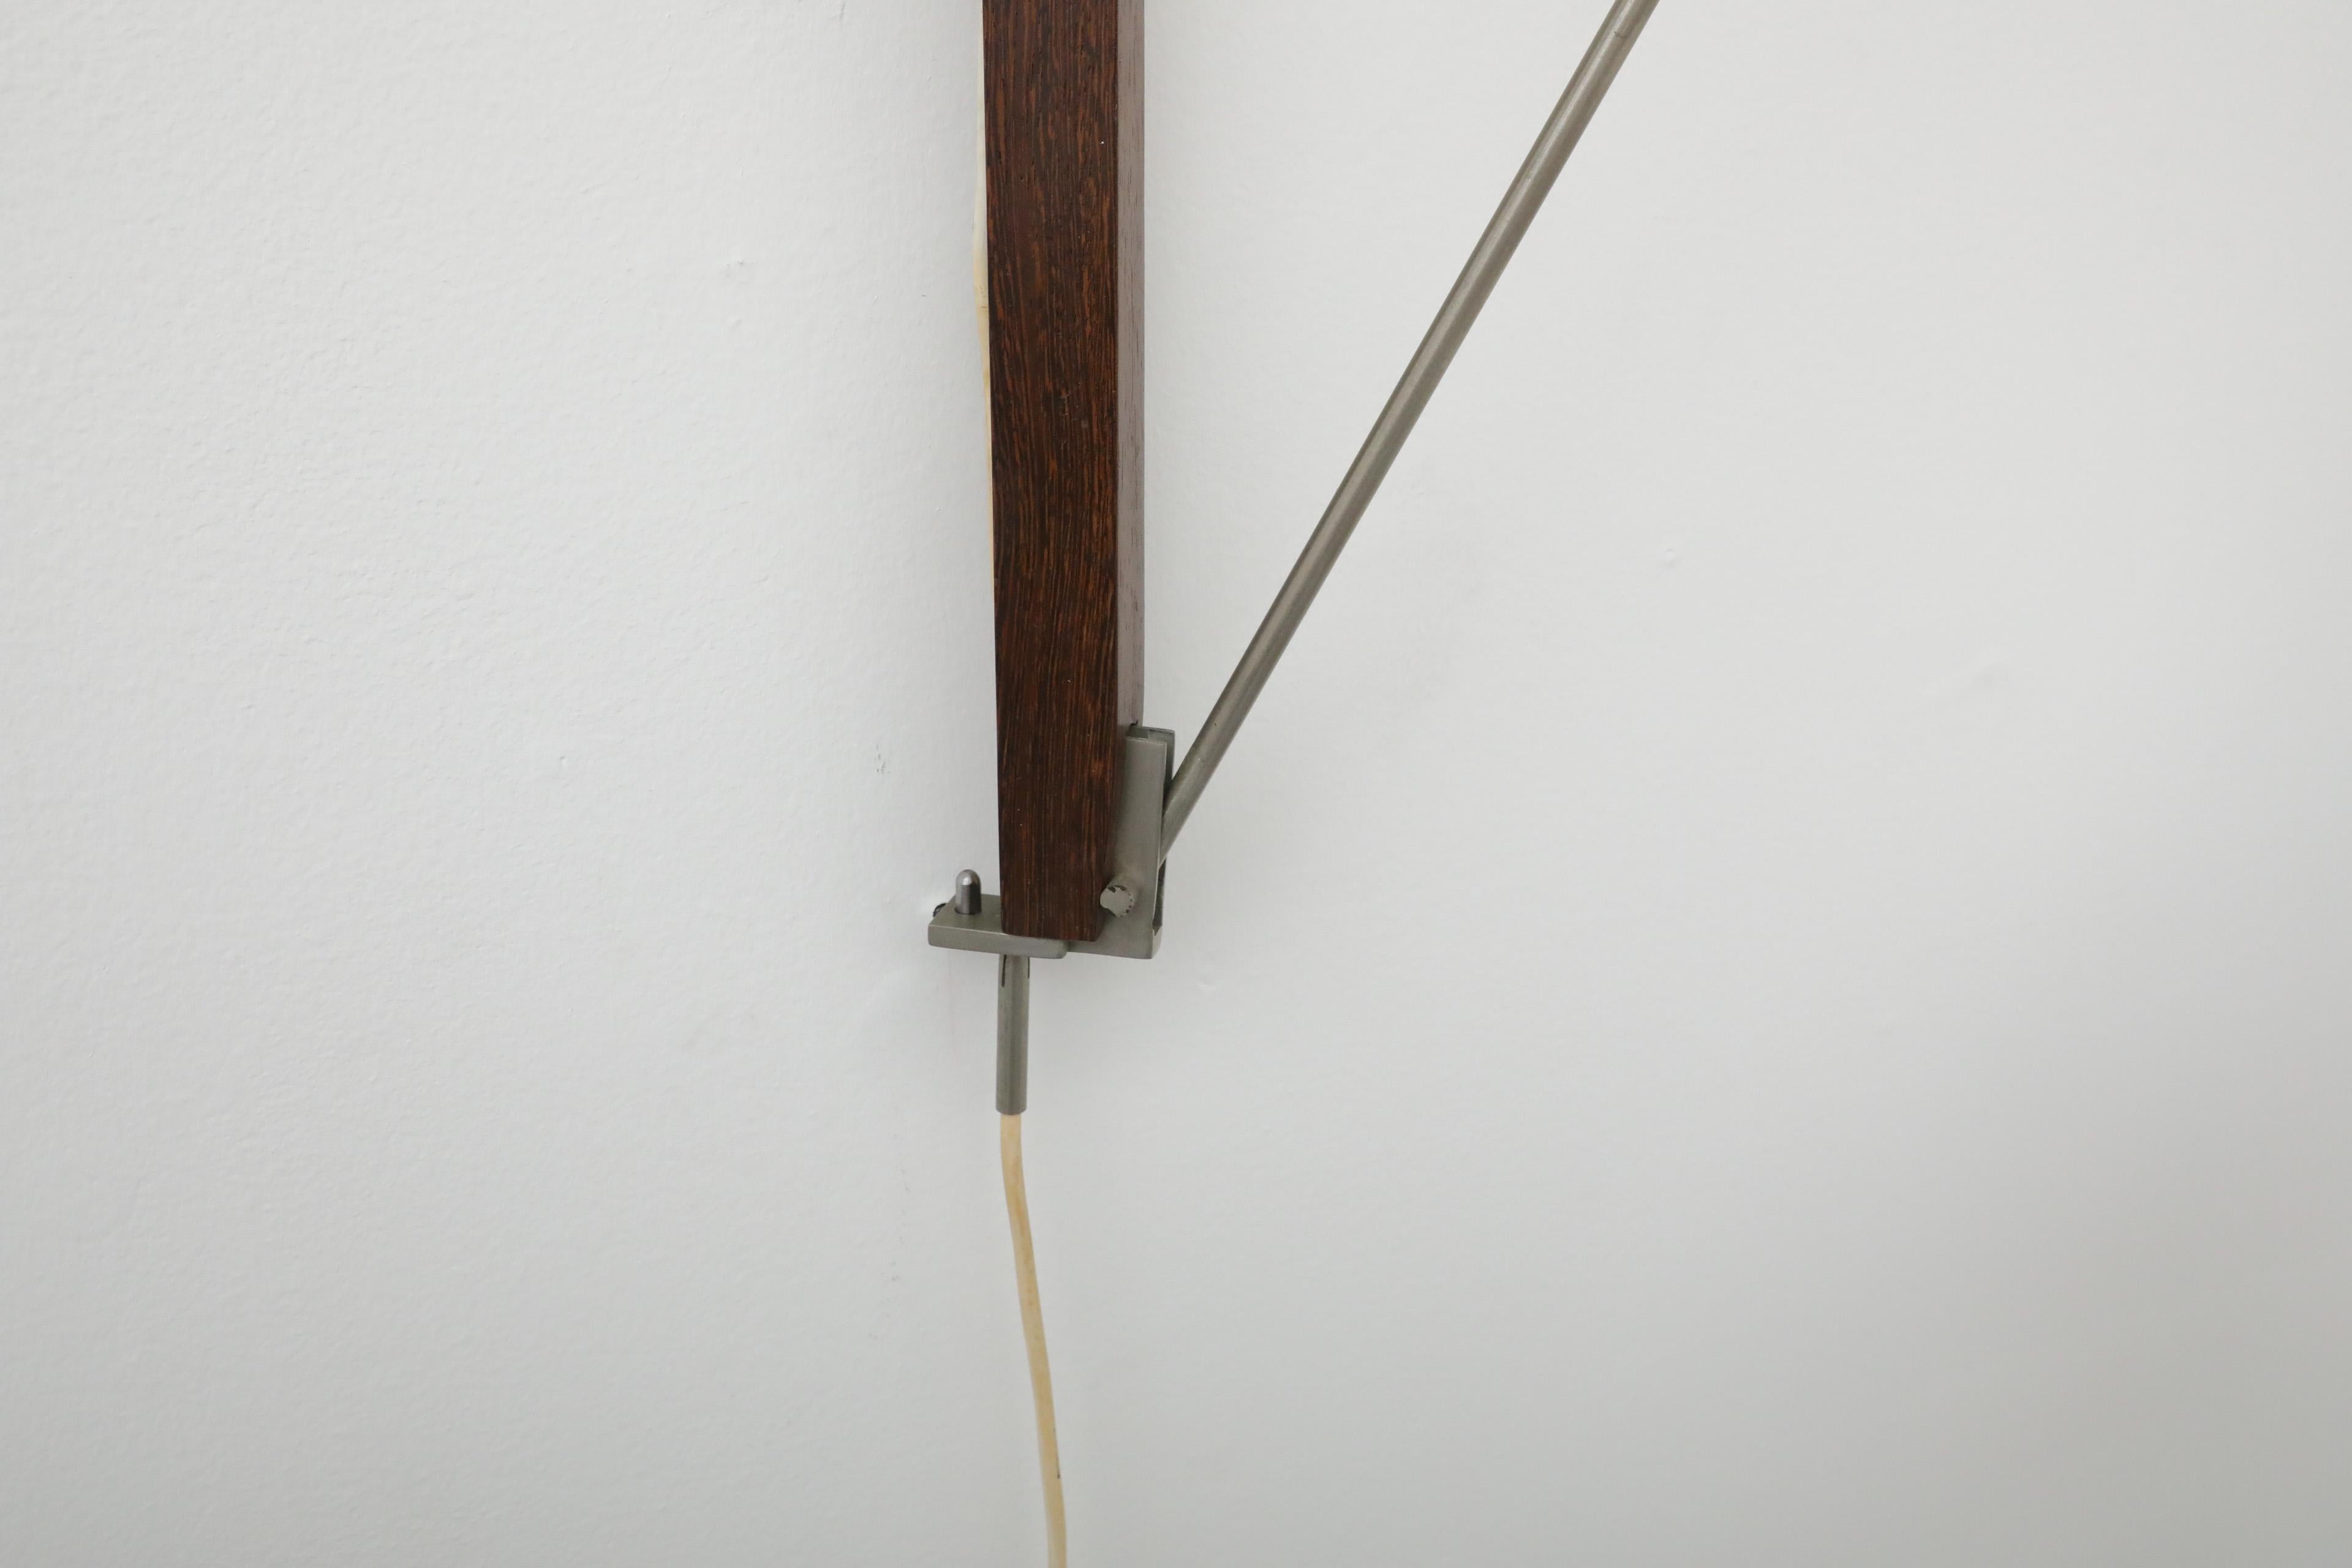 Rare Willem Hagoort Wall Sconce w/ White Enameled Metal Cone Shade & Teak Mount For Sale 5